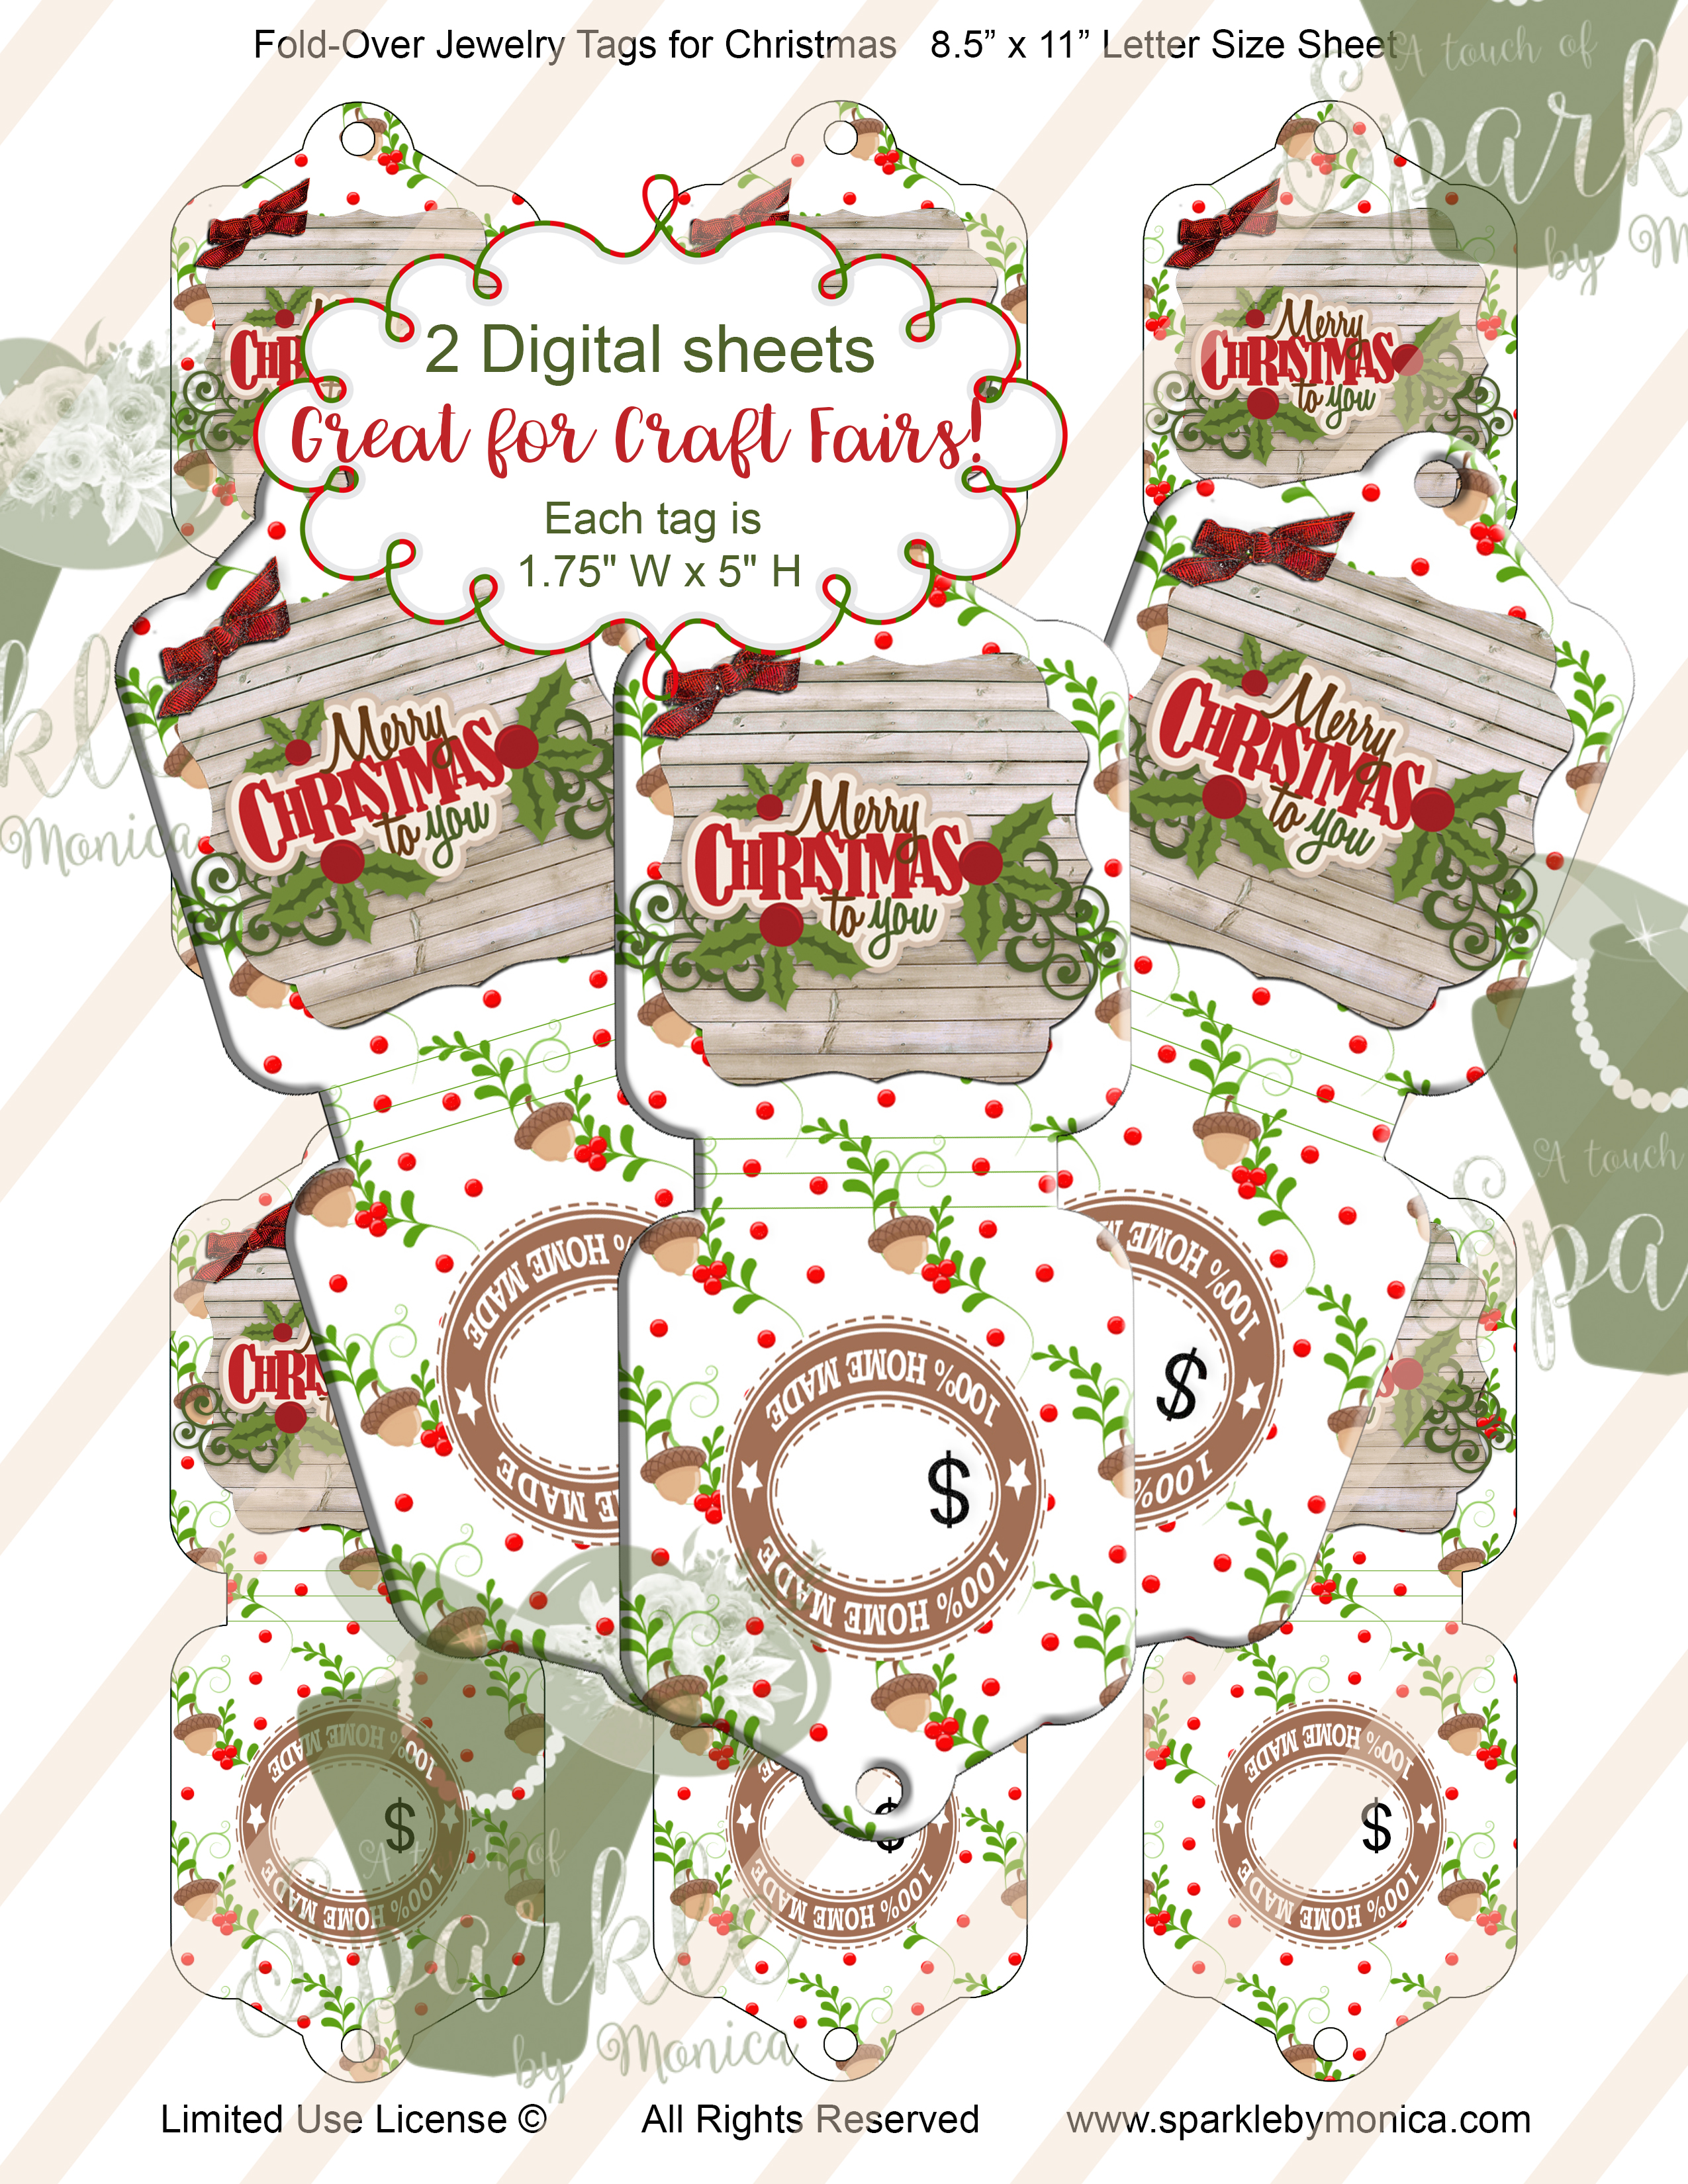 Merry Christmas Jewelry Hang Tags, Digital Jewelry Cards: Instant Download - Sparkle By Monica